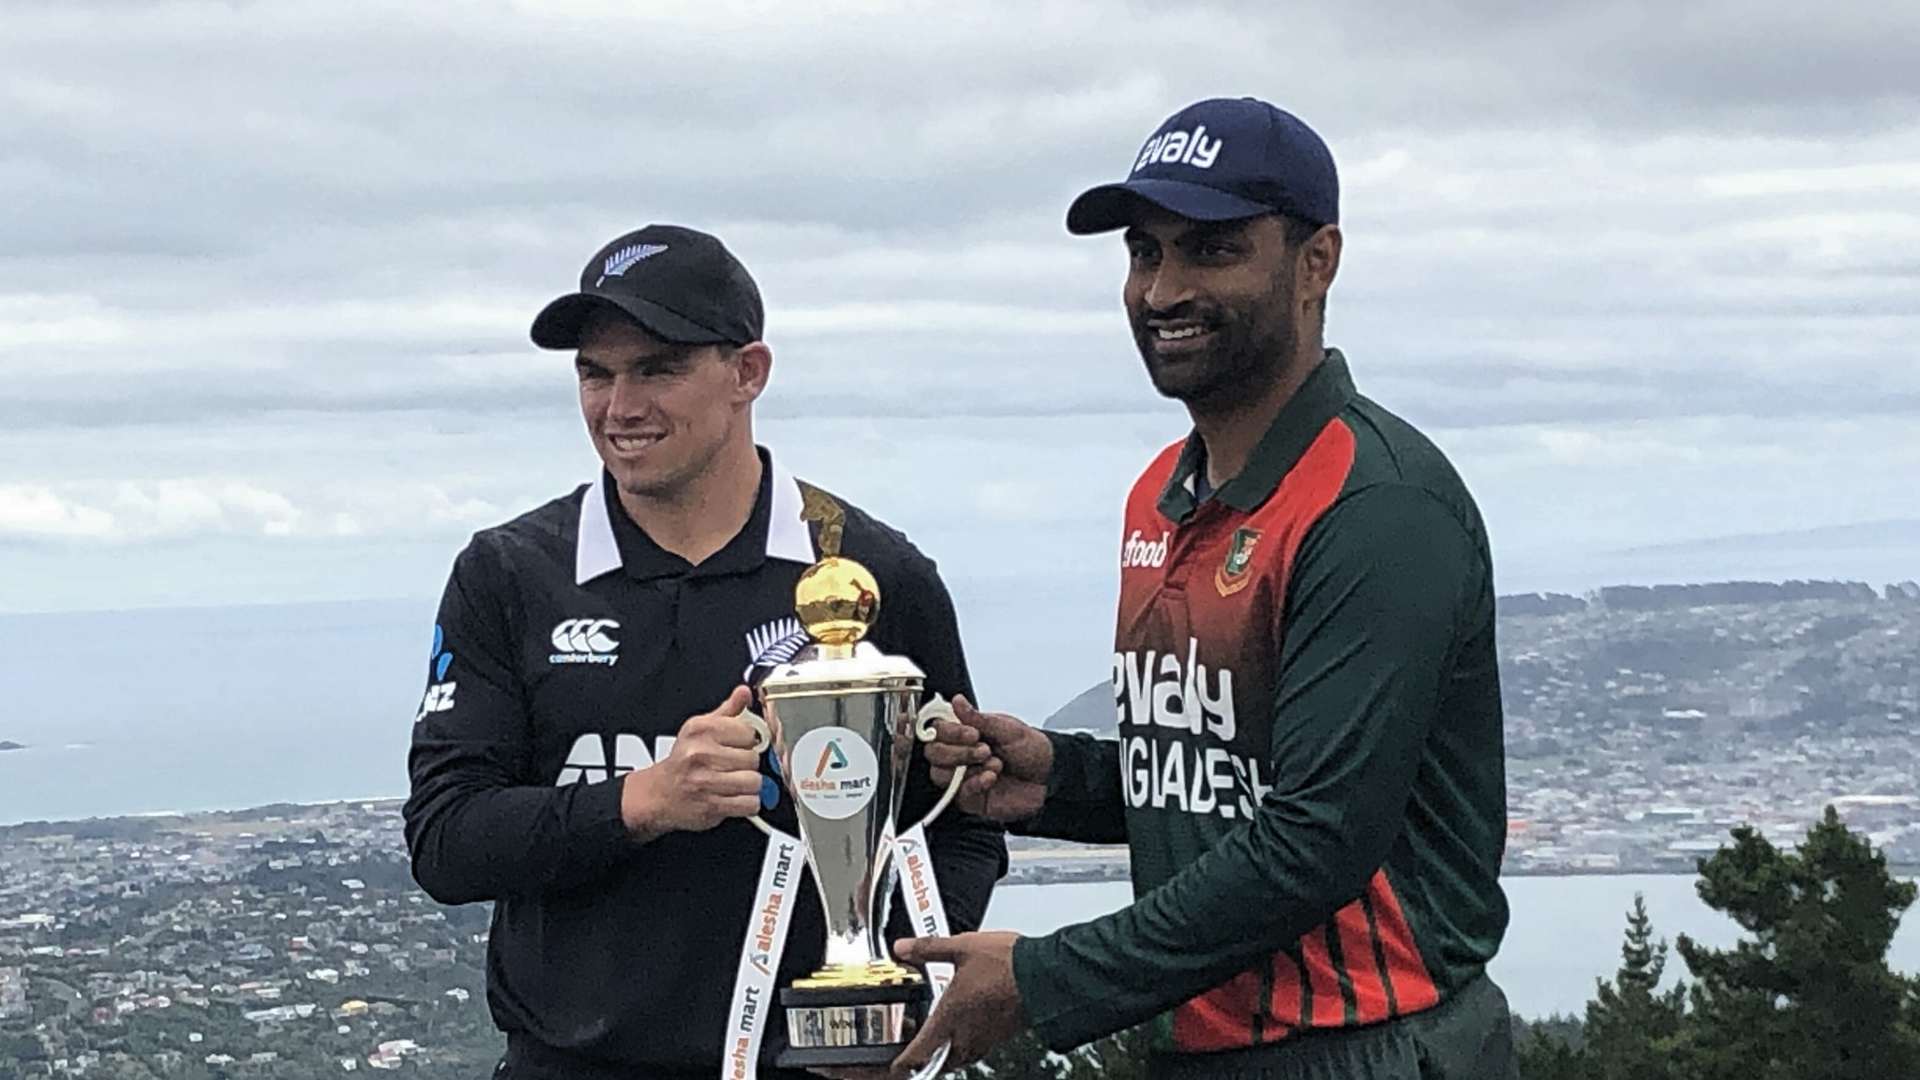 Respective captain with the trophy, Image credit: Facebook/BCB